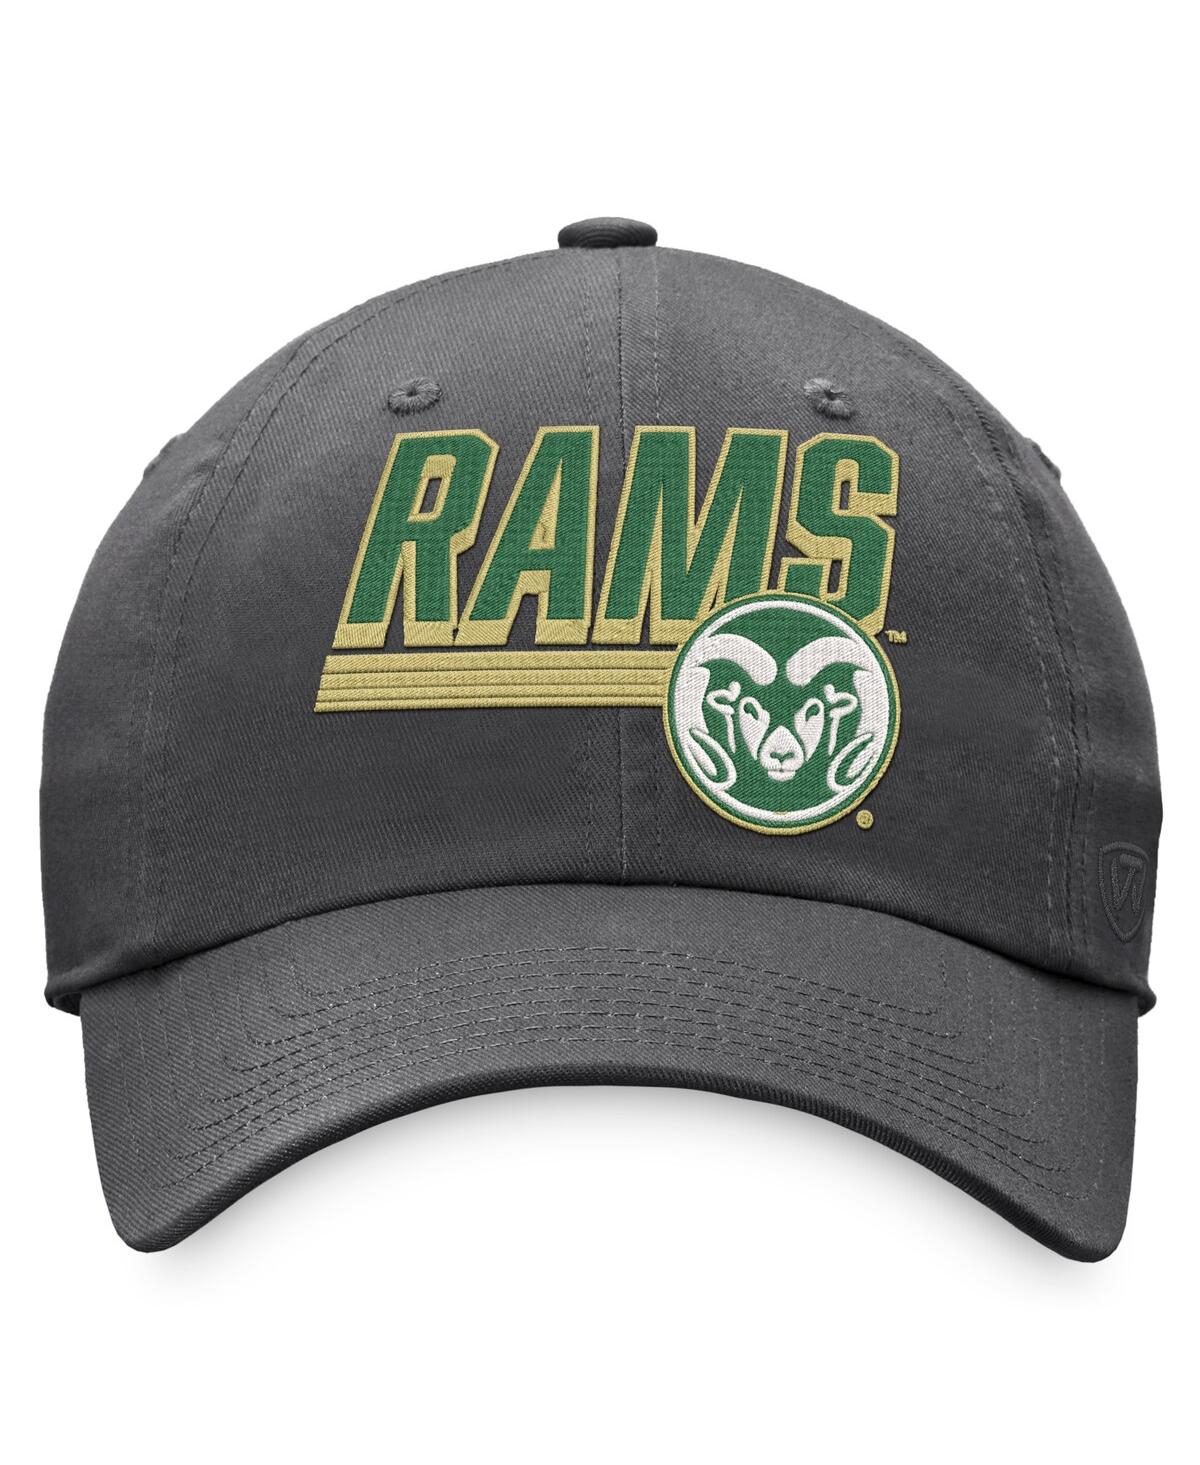 Shop Top Of The World Men's  Charcoal Colorado State Rams Slice Adjustable Hat